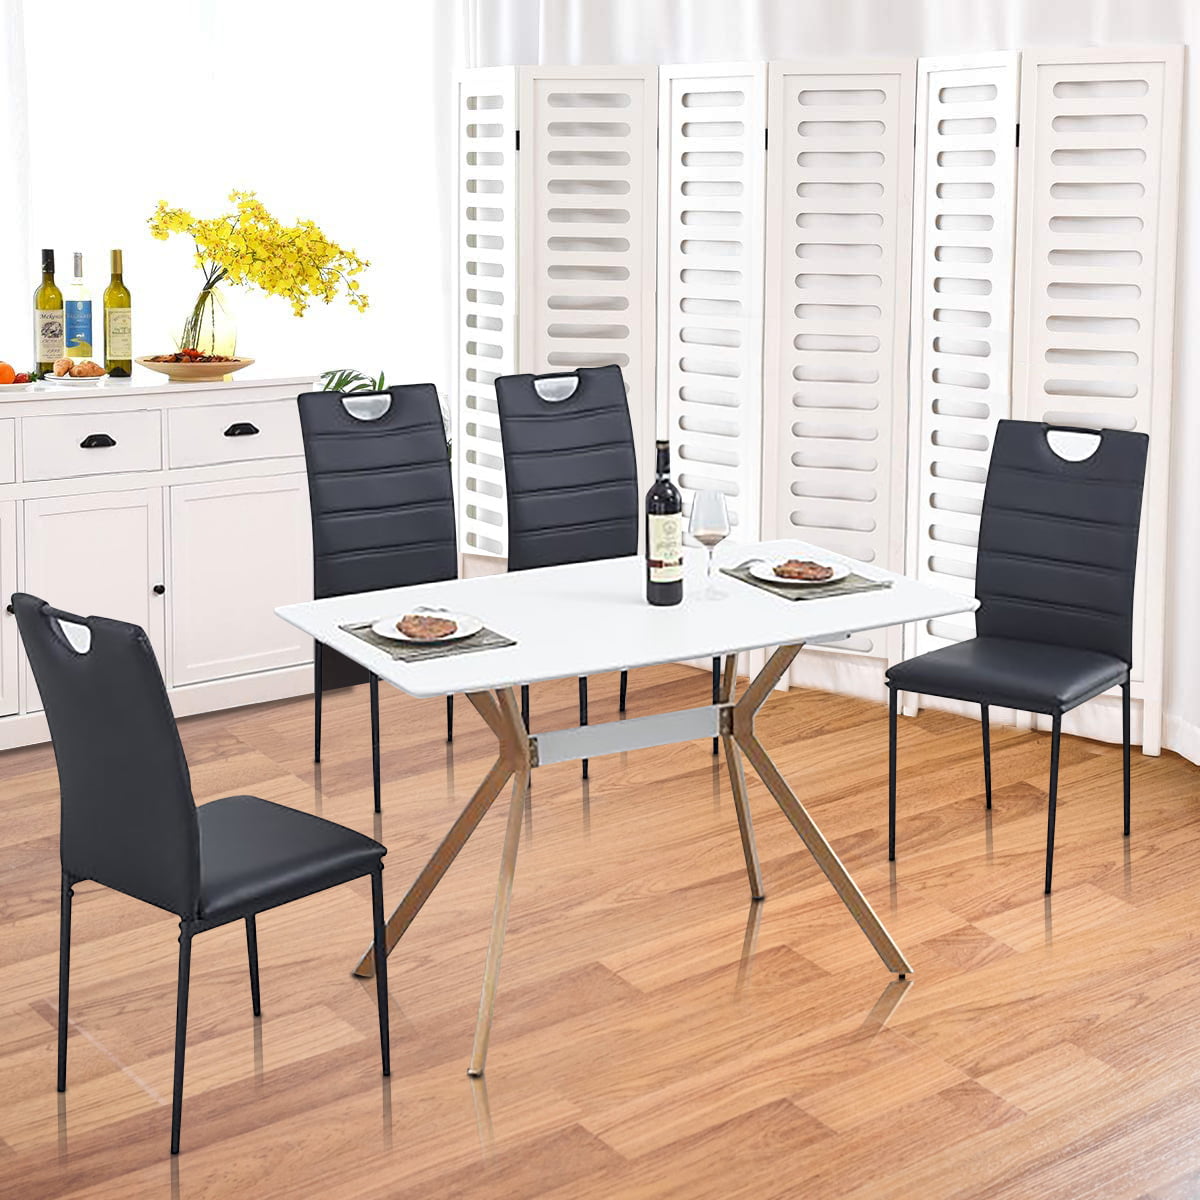 Set of 4 Contemporary Design Solid Oak Dining Chairs Kitchen Lounge room chairs 